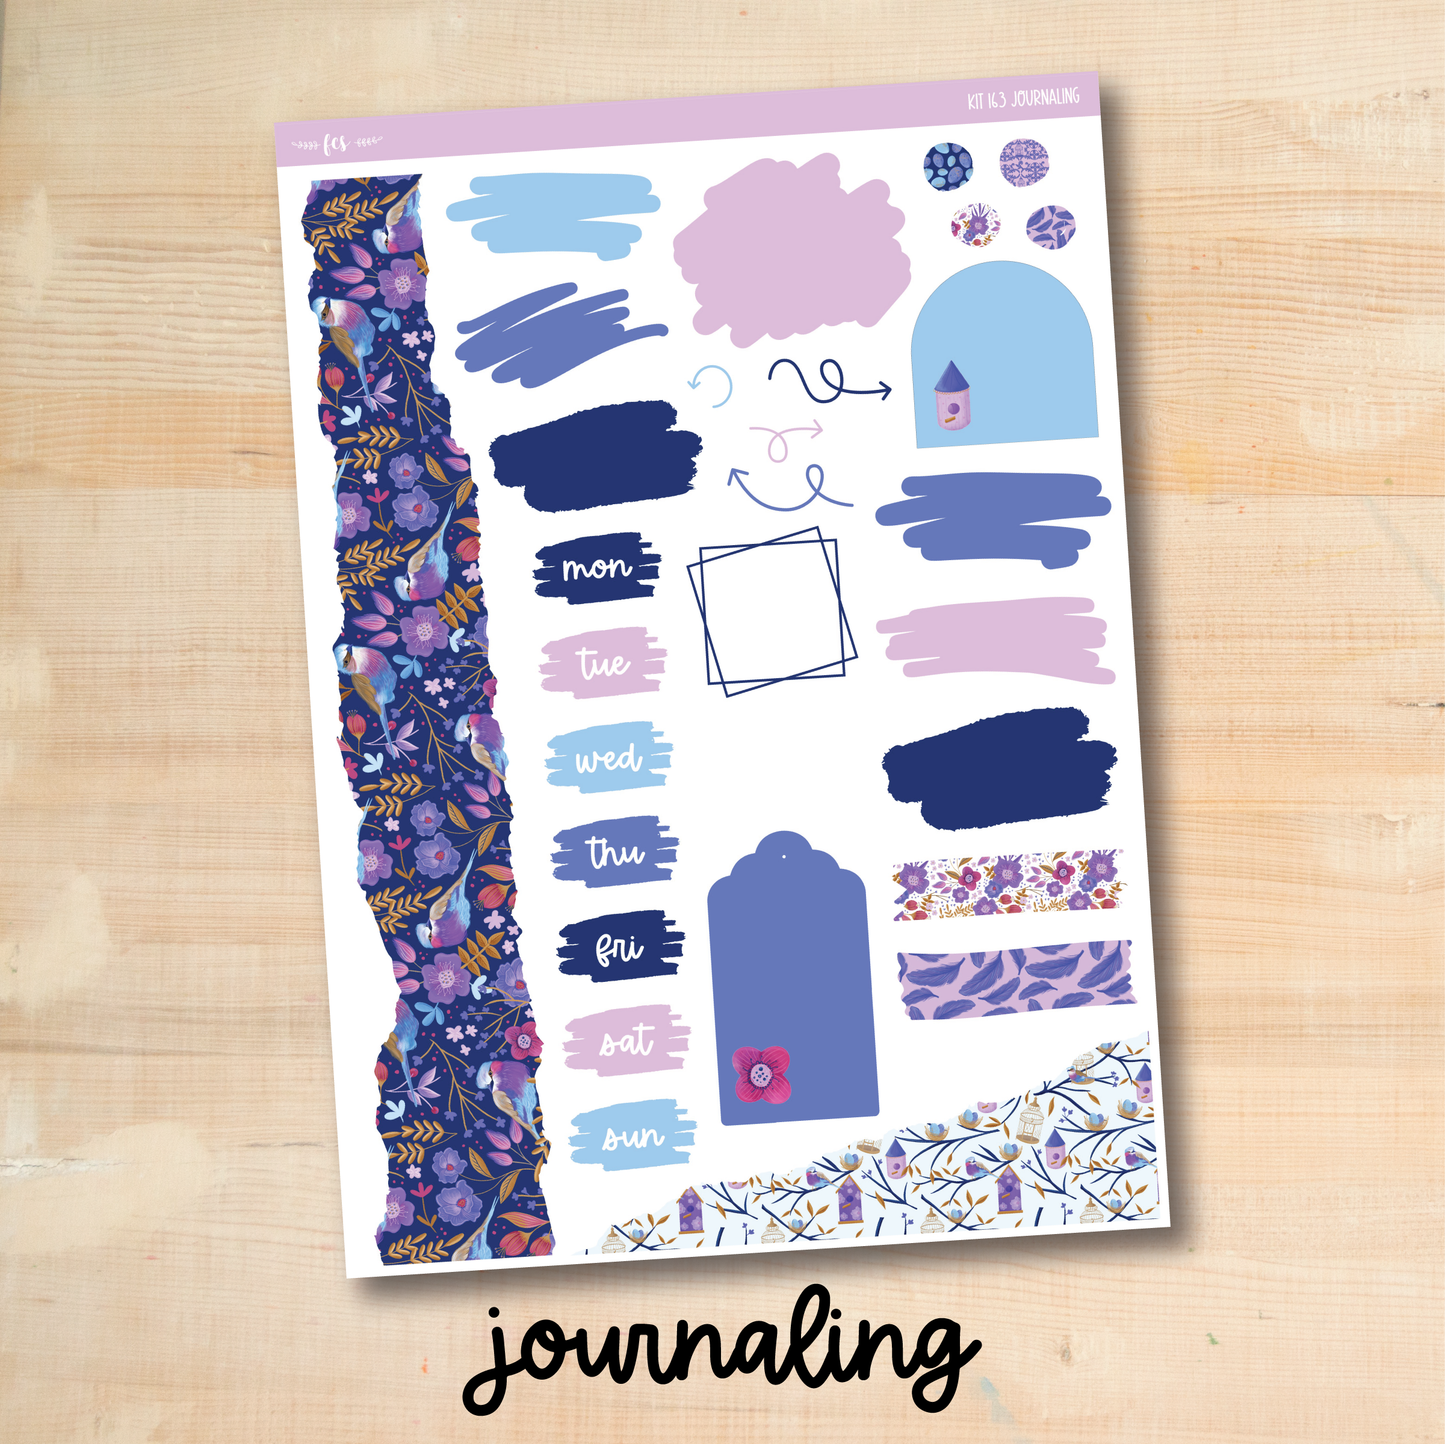 KIT-163 || FANCY FEATHERS weekly planner kit for Erin Condren, Plum Paper, MakseLife and more!